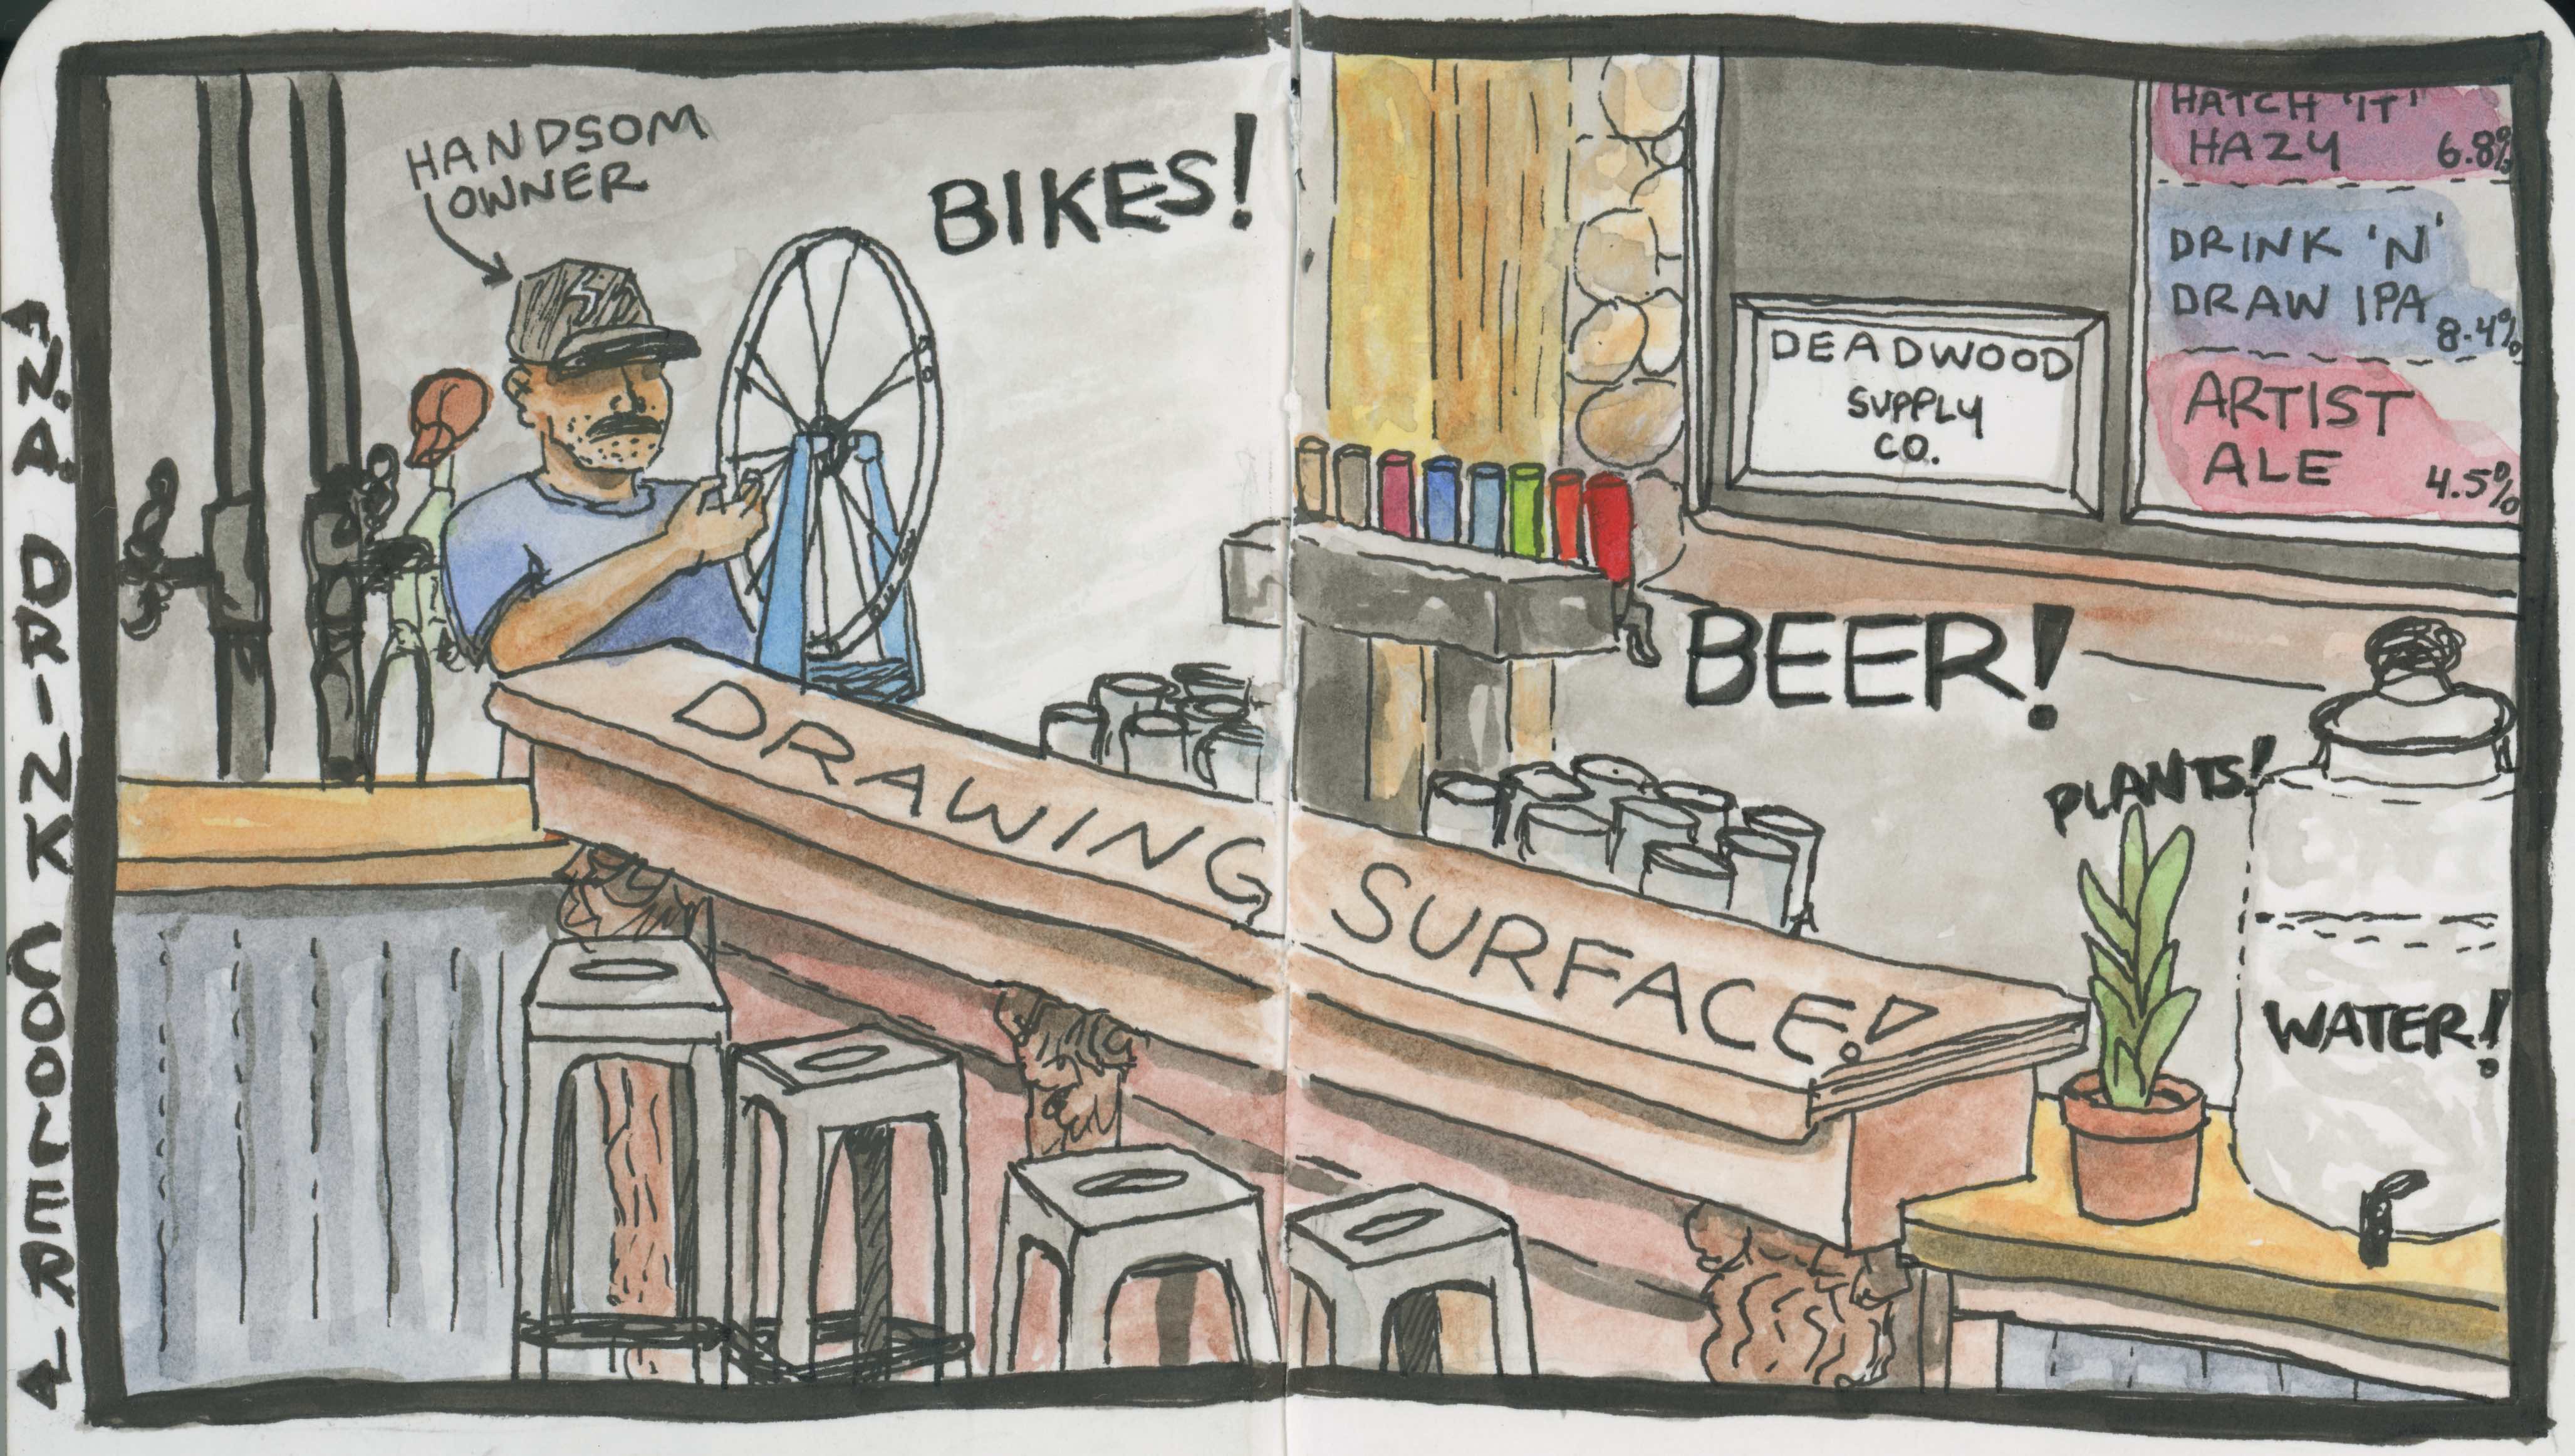 Sketch of the inside of Deadwood Supply Company